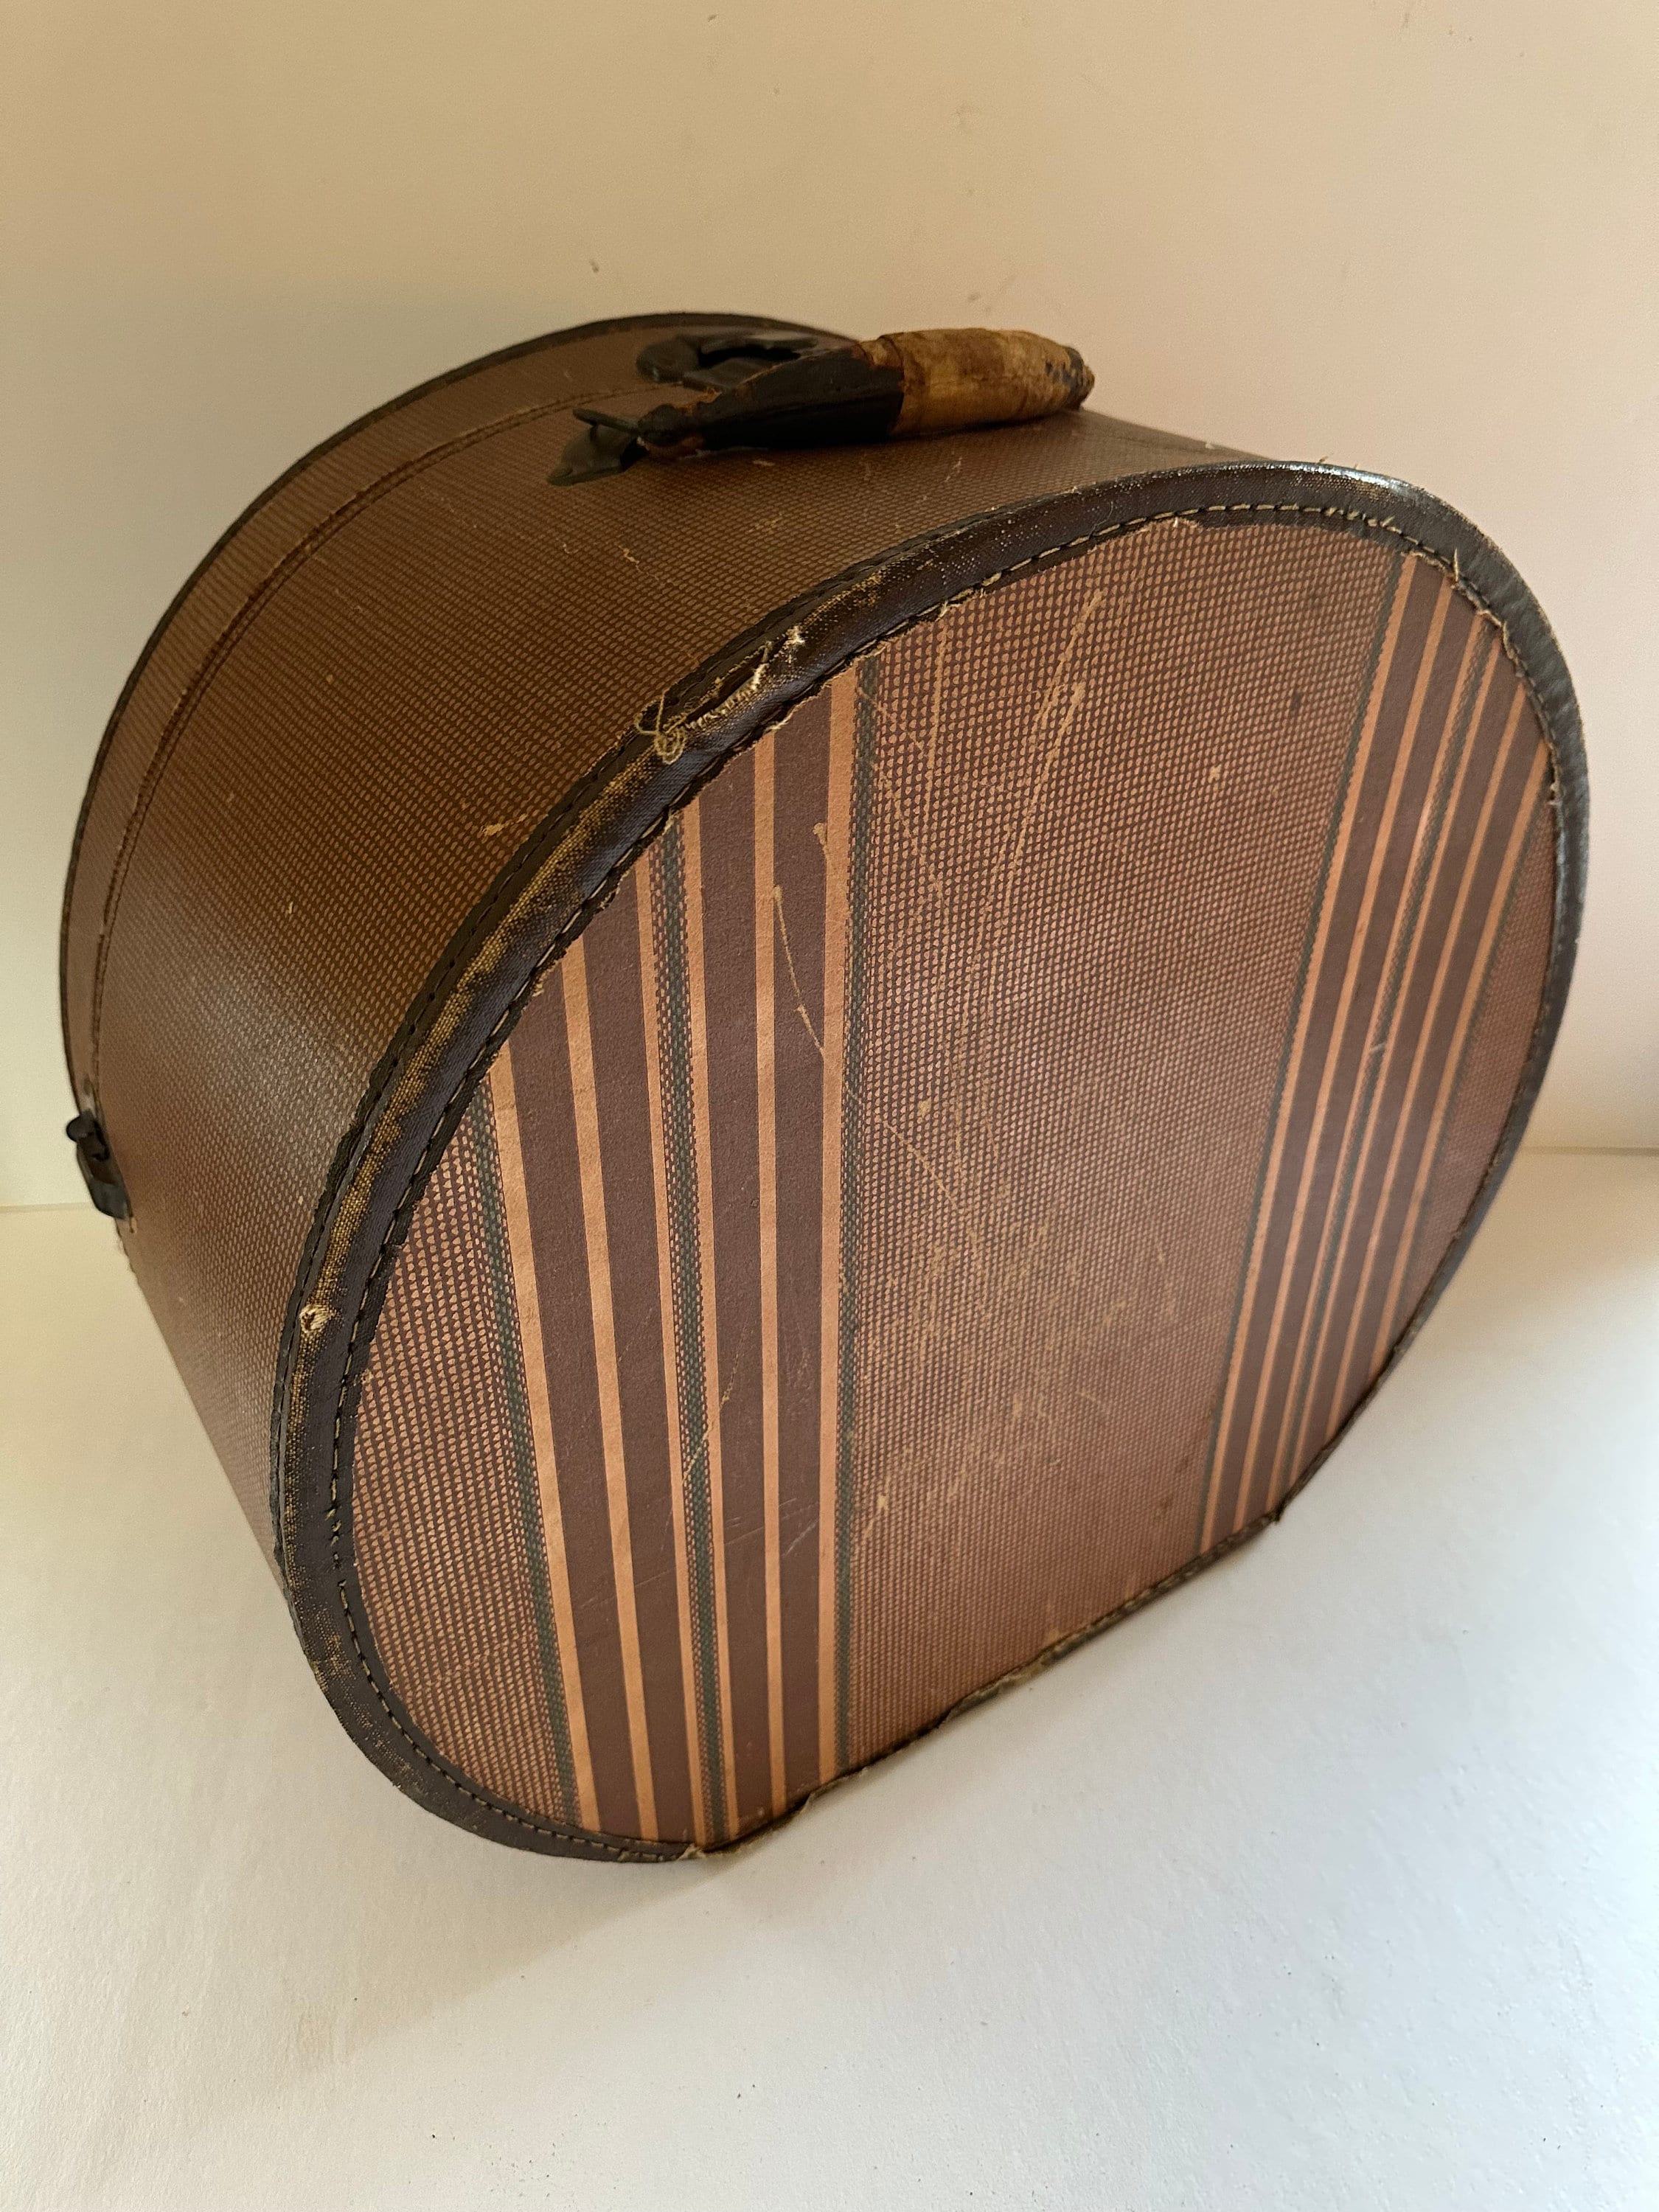 VINTAGE Travis's Hat Box Zippered Luggage Red With Mirror And